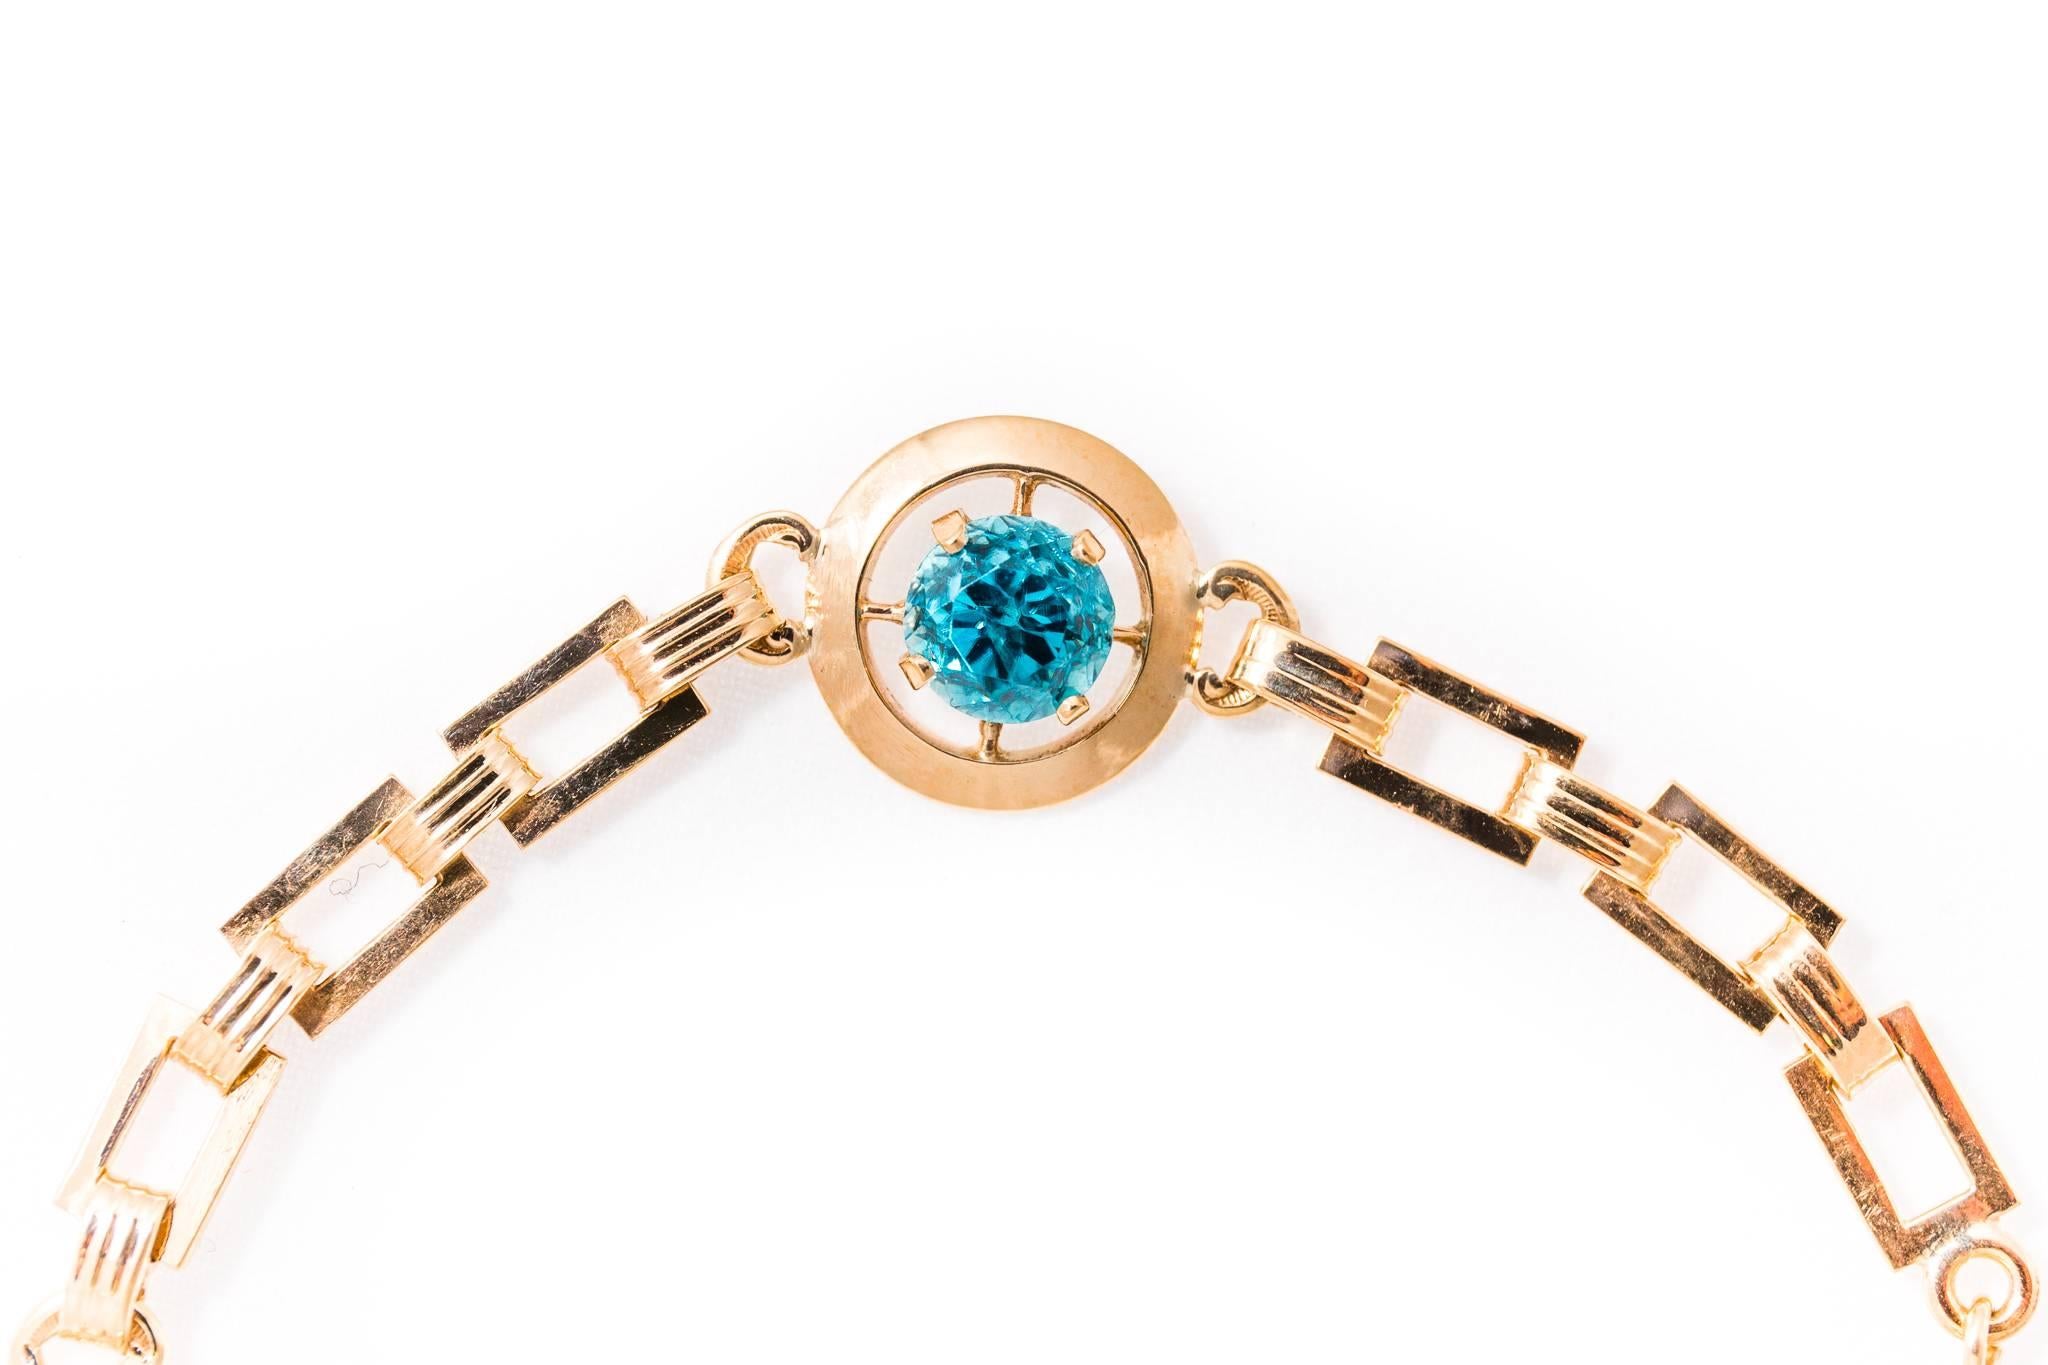 Beacon Hill Jewelers Presents:

A vintage retro period mid century blue zircon bracelet in 14 karat yellow gold.  Set with a trio of high quality rich vivid blue VS clarity blue zircons, this bracelet is a classic mid century piece of American